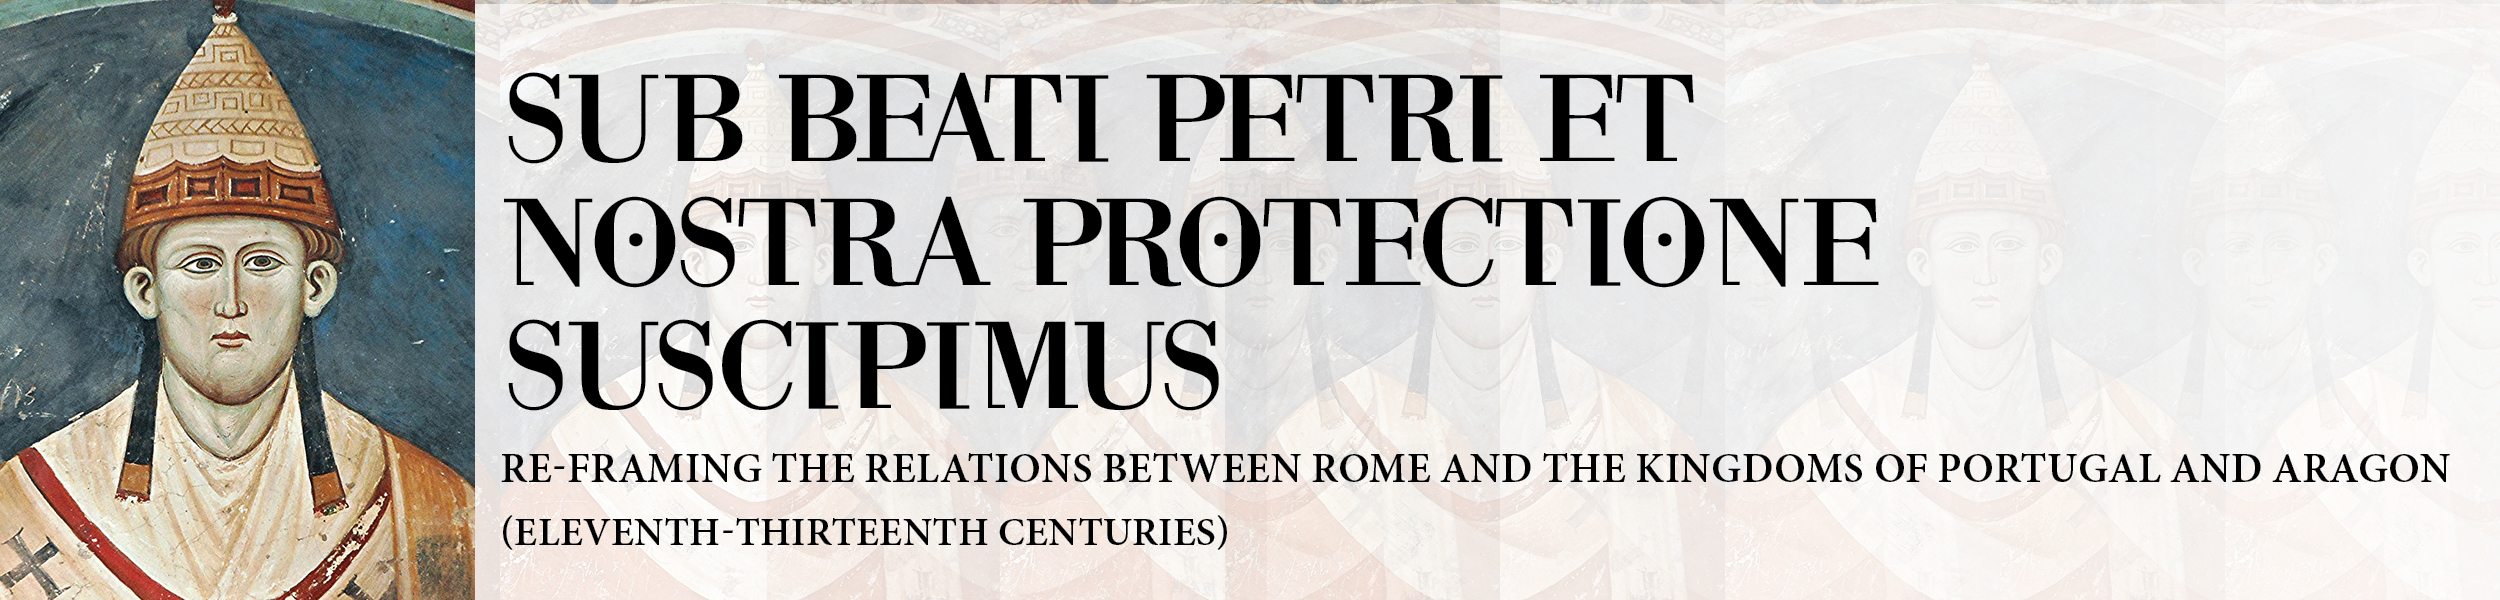 Projeto «RAP-Sub beati Petri et nostra protection suscipimus: re-framing the relations between Rome and the kingdoms of Portugal and Aragon (eleventh-